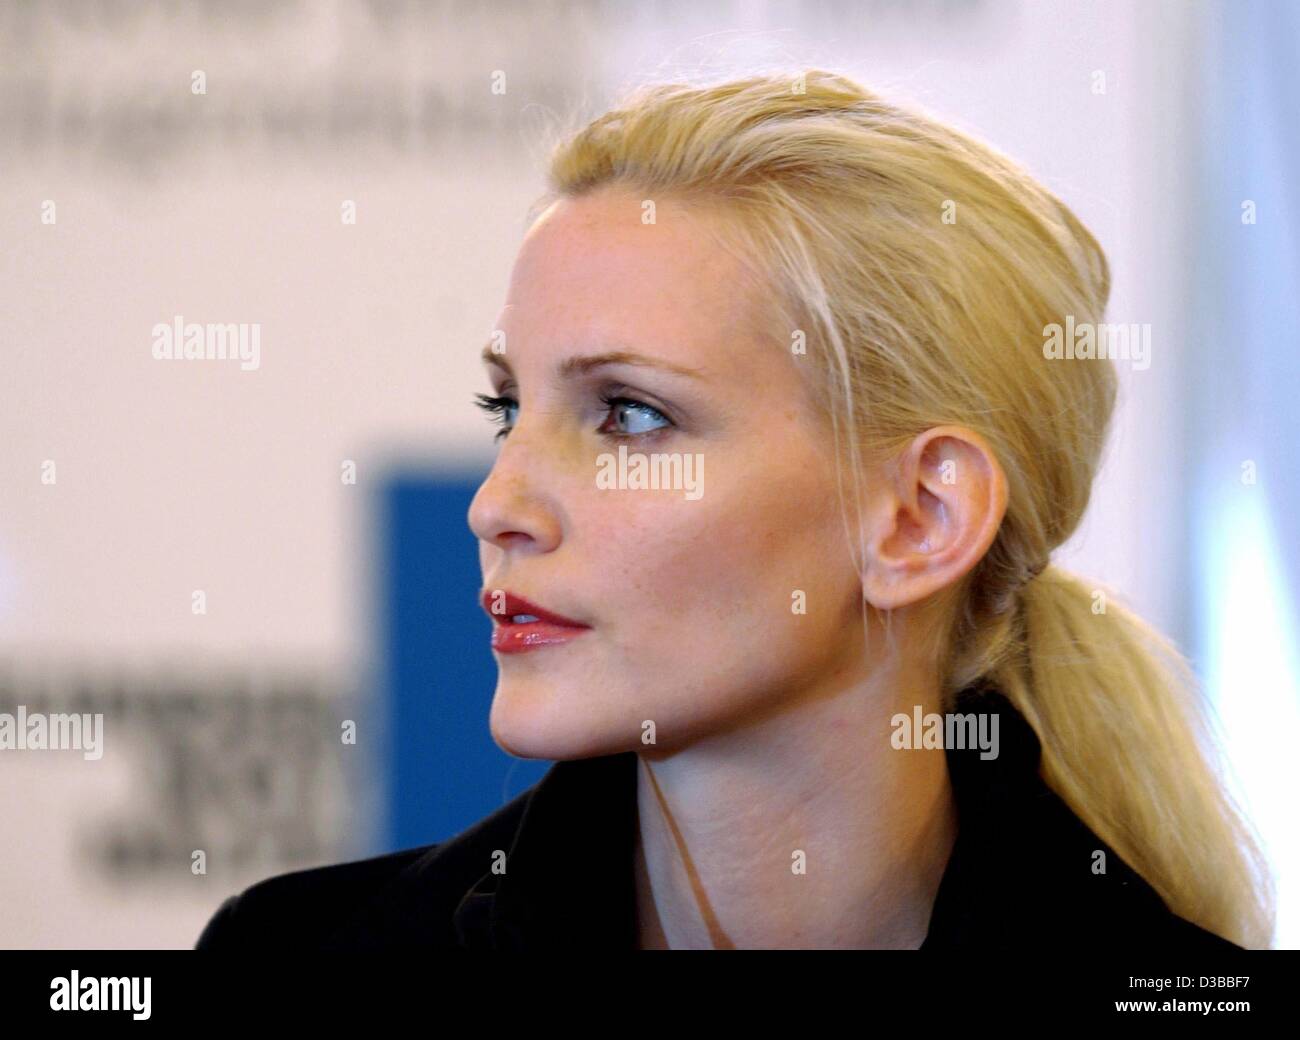 (dpa) - German supermodel Nadja Auermann, pictured at a press conference in Castle Bellevue, Berlin, 4 November 2002. She informed the media about a planned 'Evening for Children' with the motto 'Children, Art, Culture' on 7 November. Stock Photo